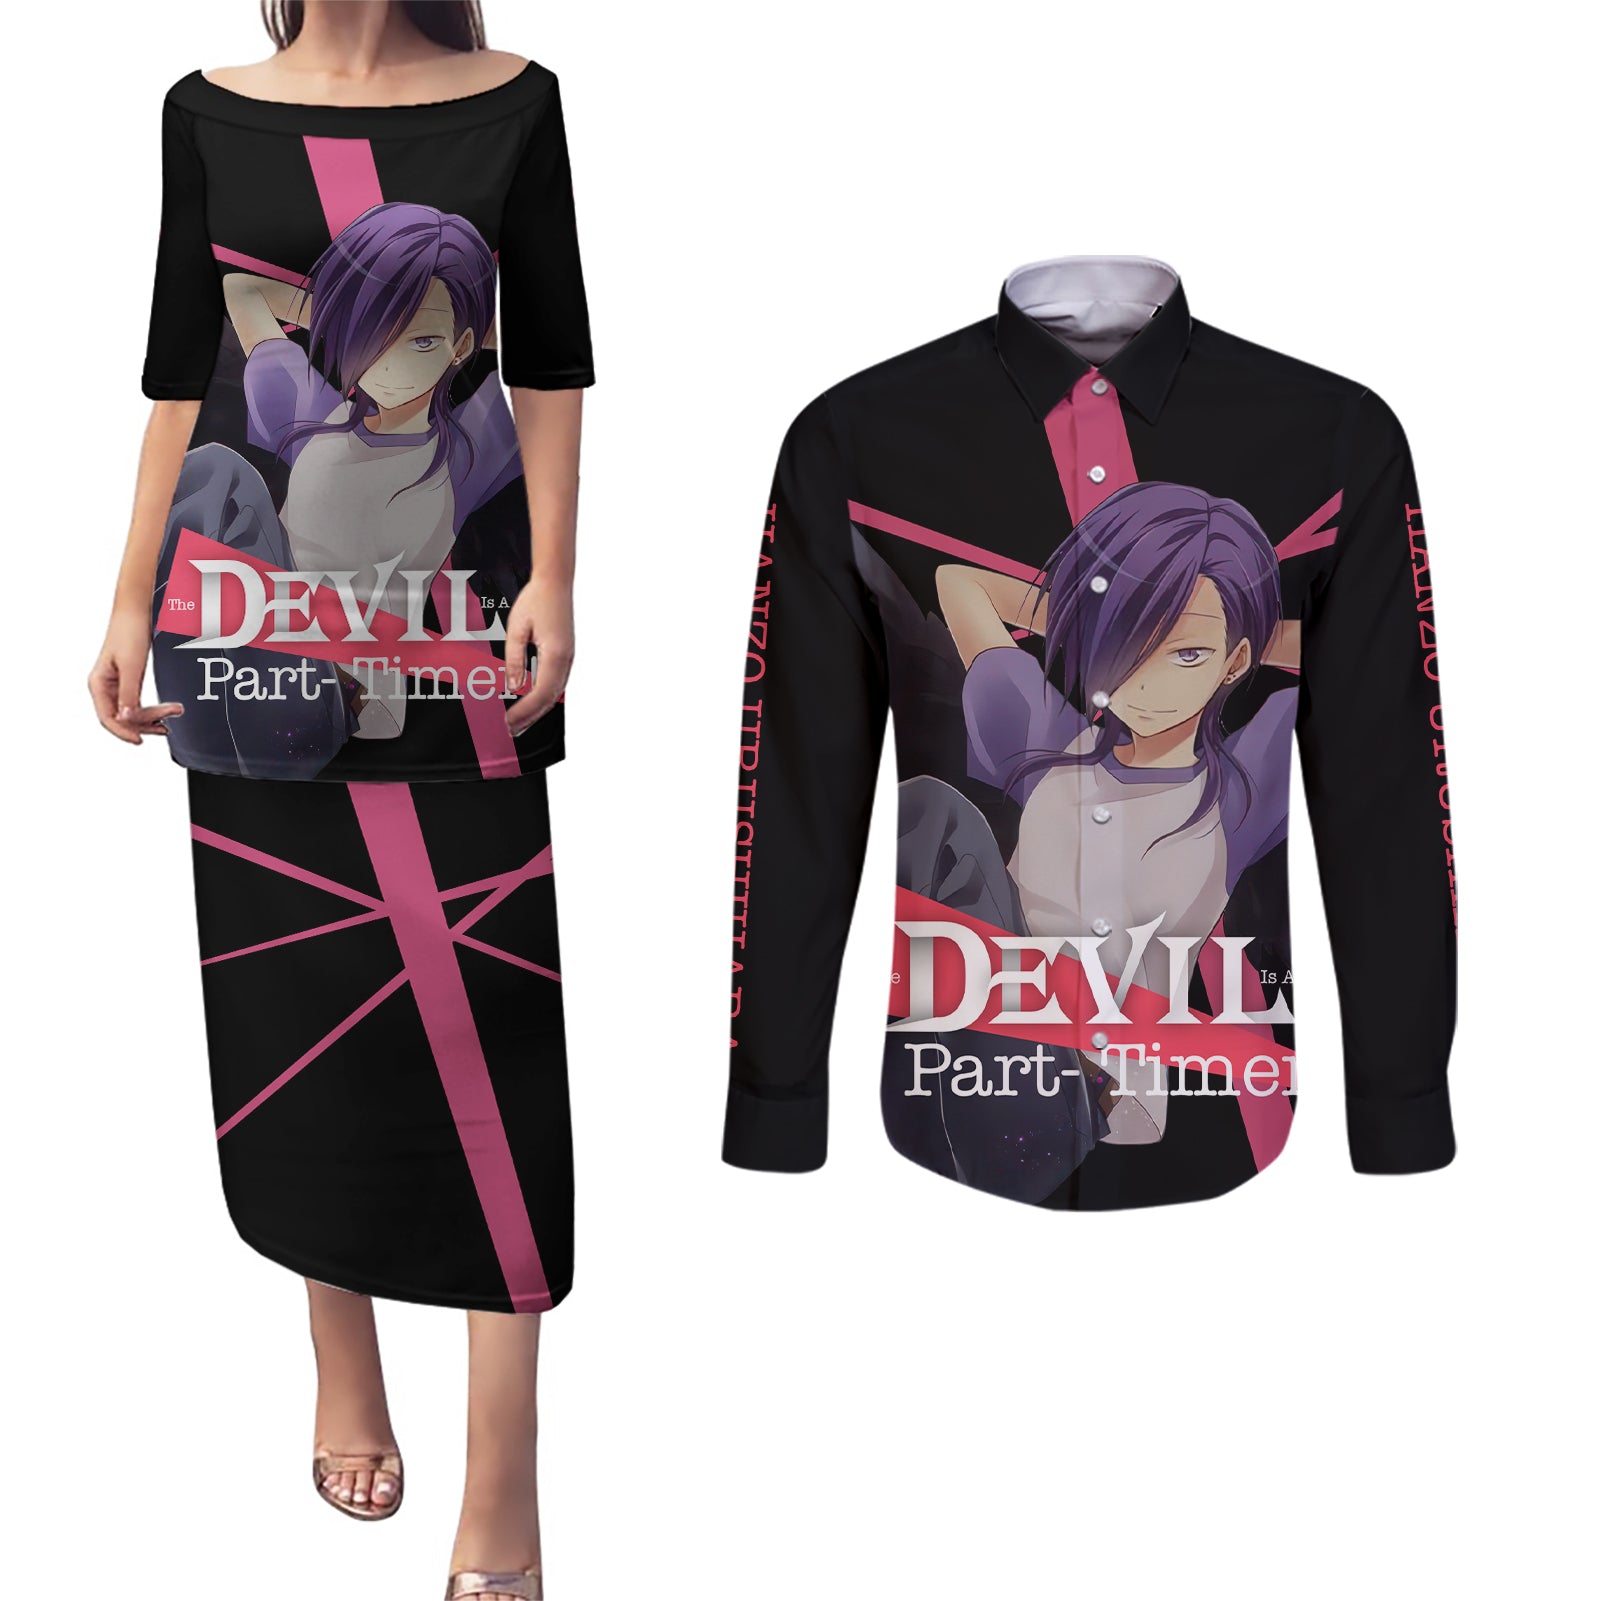 Hanzo Urushihara The Devil Part Timer Couples Matching Puletasi and Long Sleeve Button Shirt Anime Style